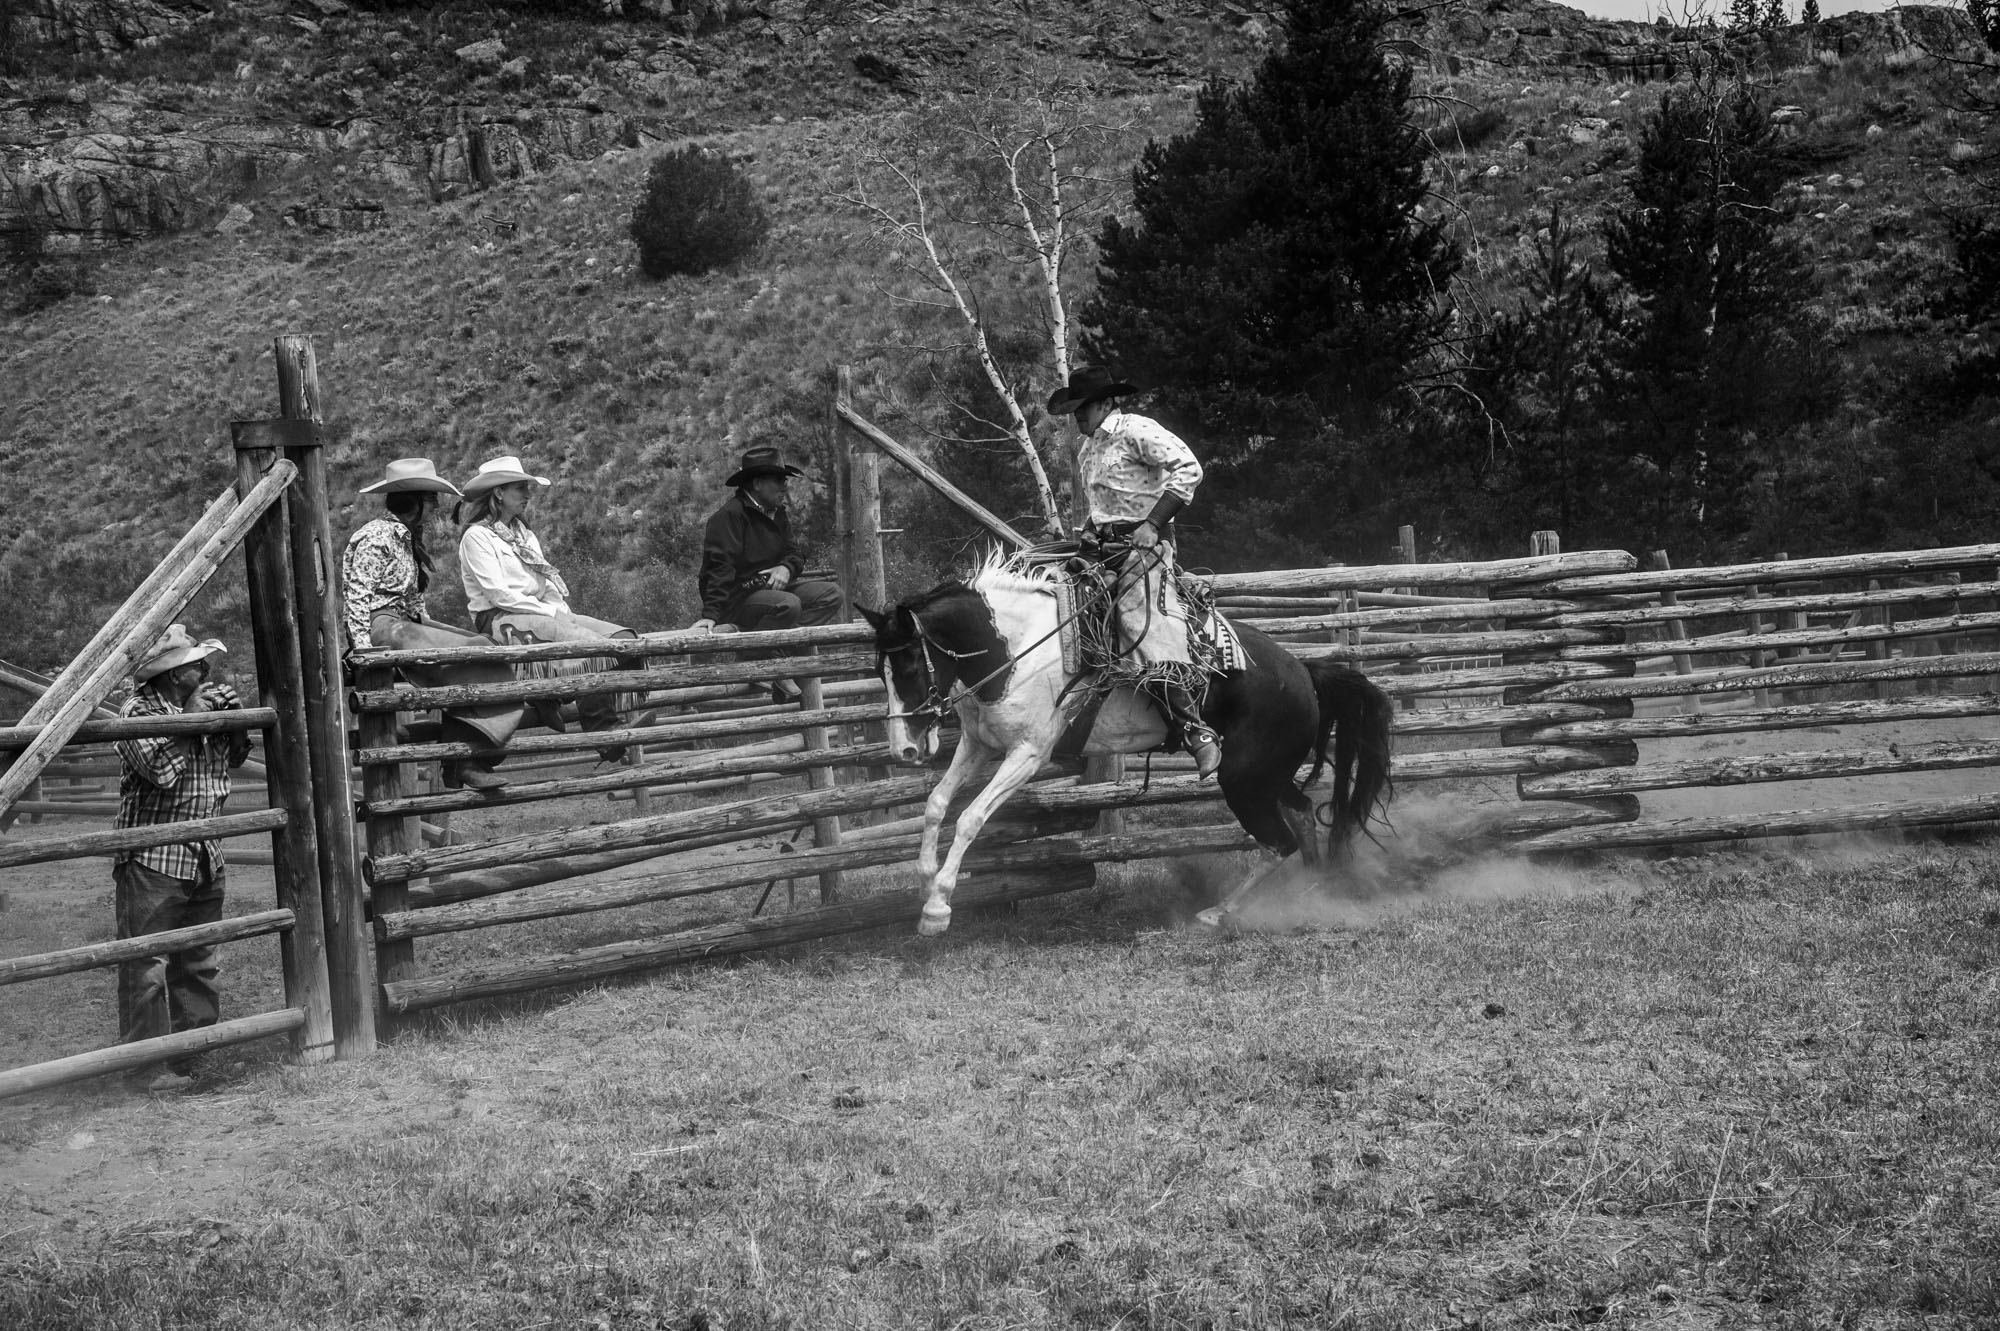 Fine Art Limited Edition Photo Prints of Cowboys, Horses, and life in the West. Hoppy. A Cowboy picture in black and white. This...